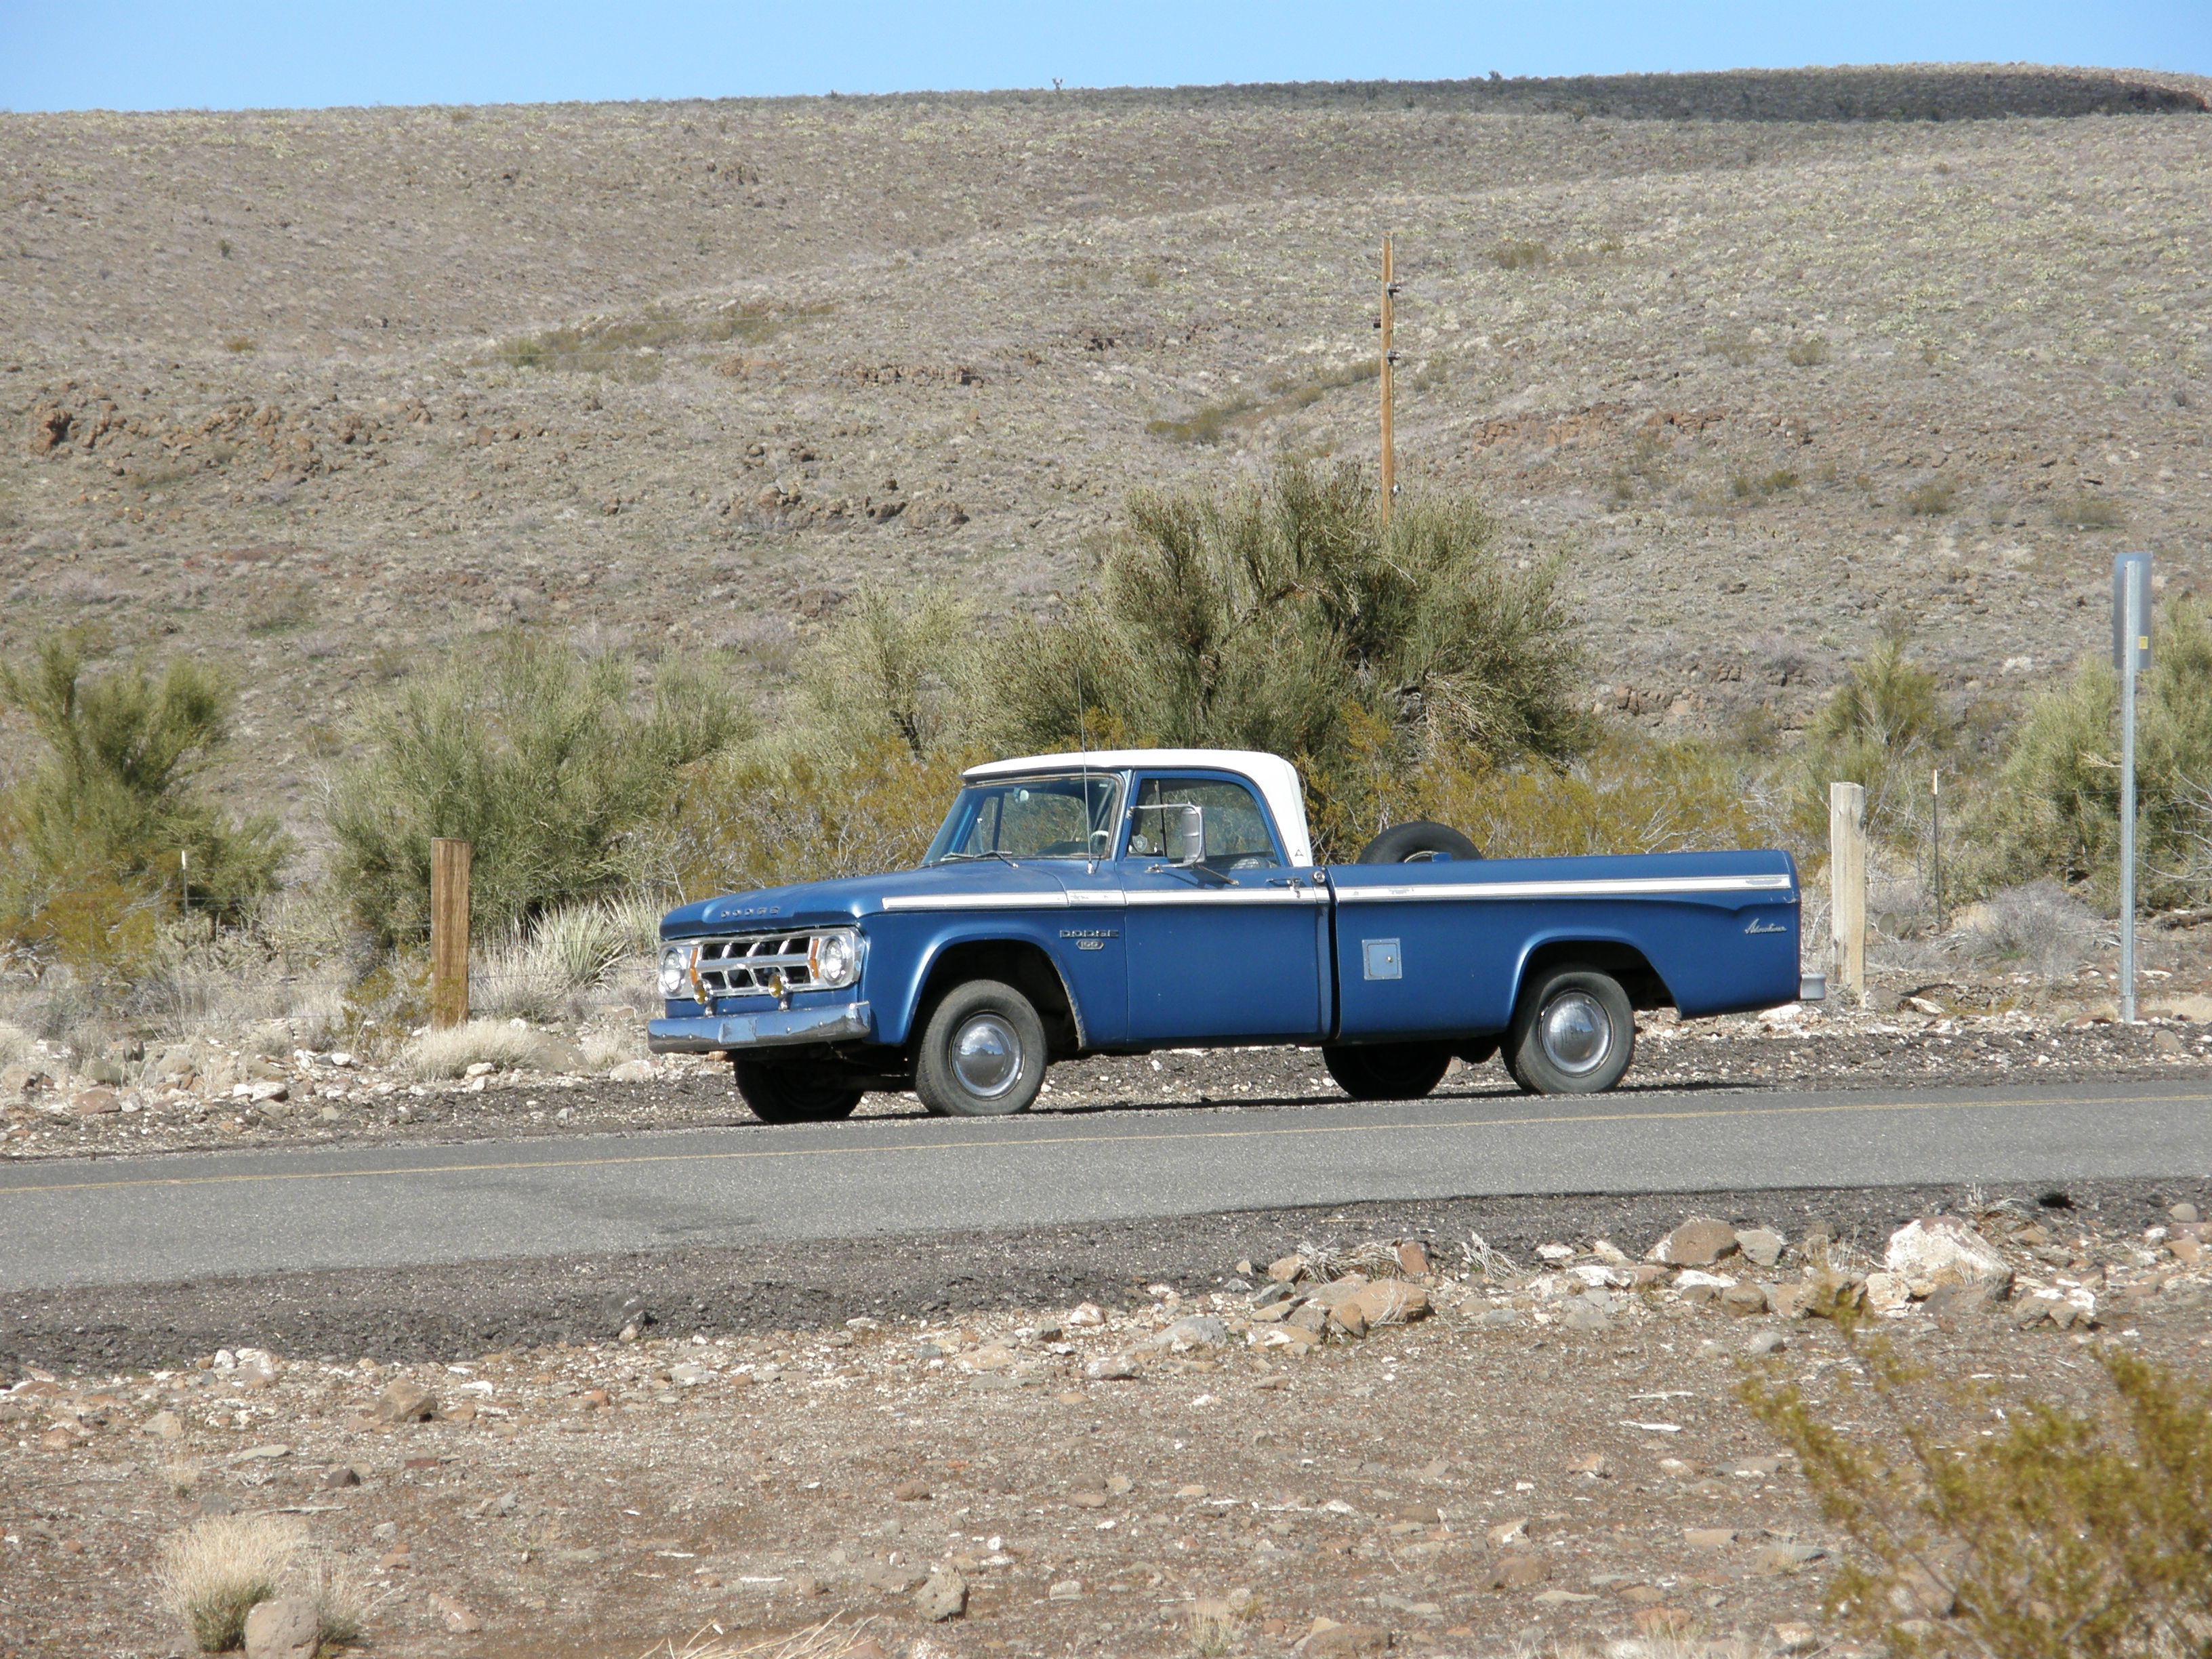 This is my 1968 Dodge Adventurer on the old Beale Wagon Road near Kingman,